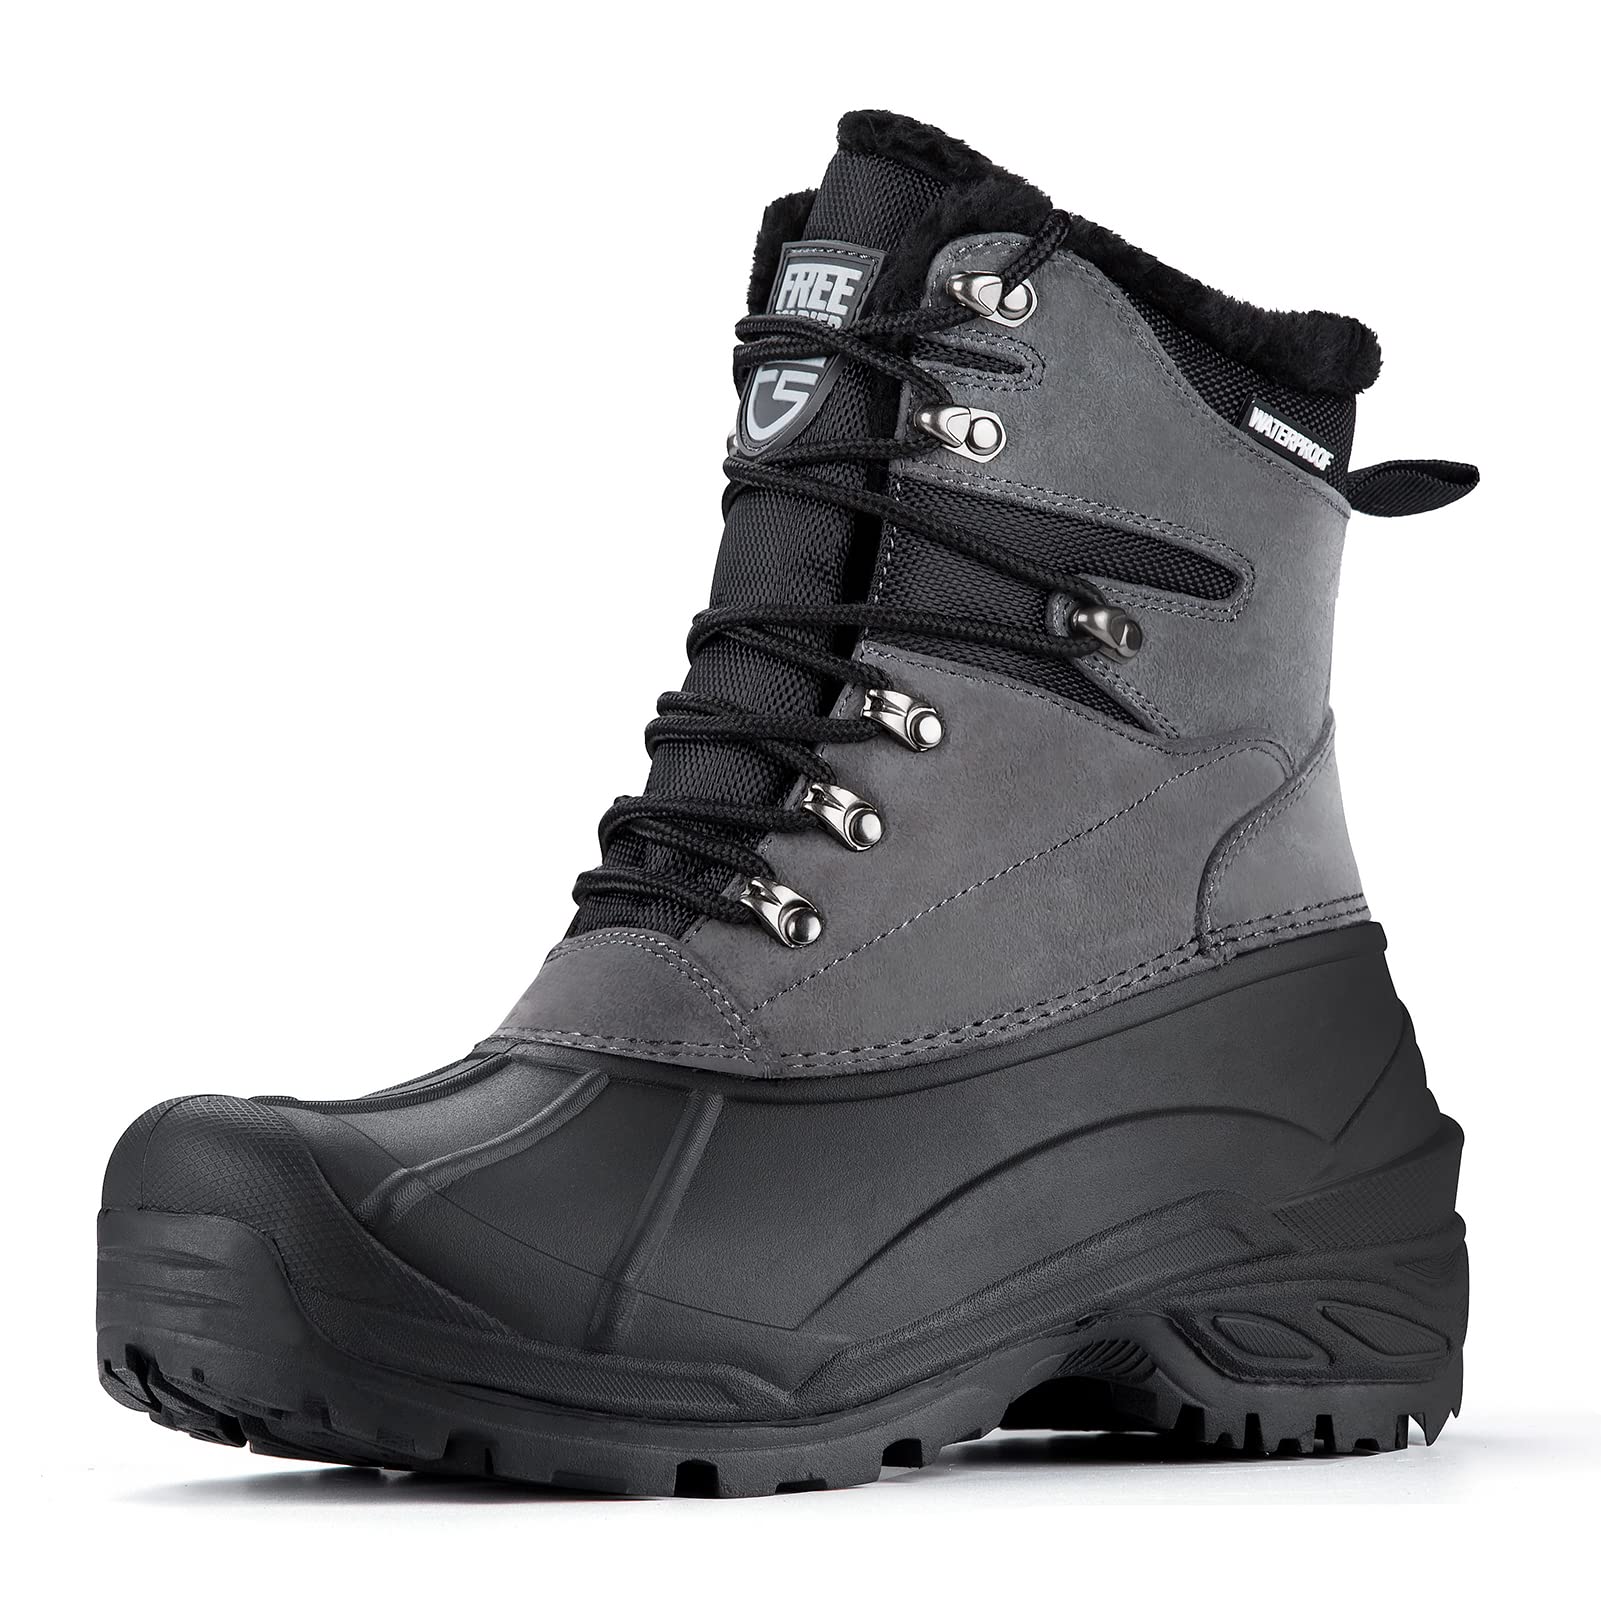 Insulated Waterproof Snow Hunting Boots